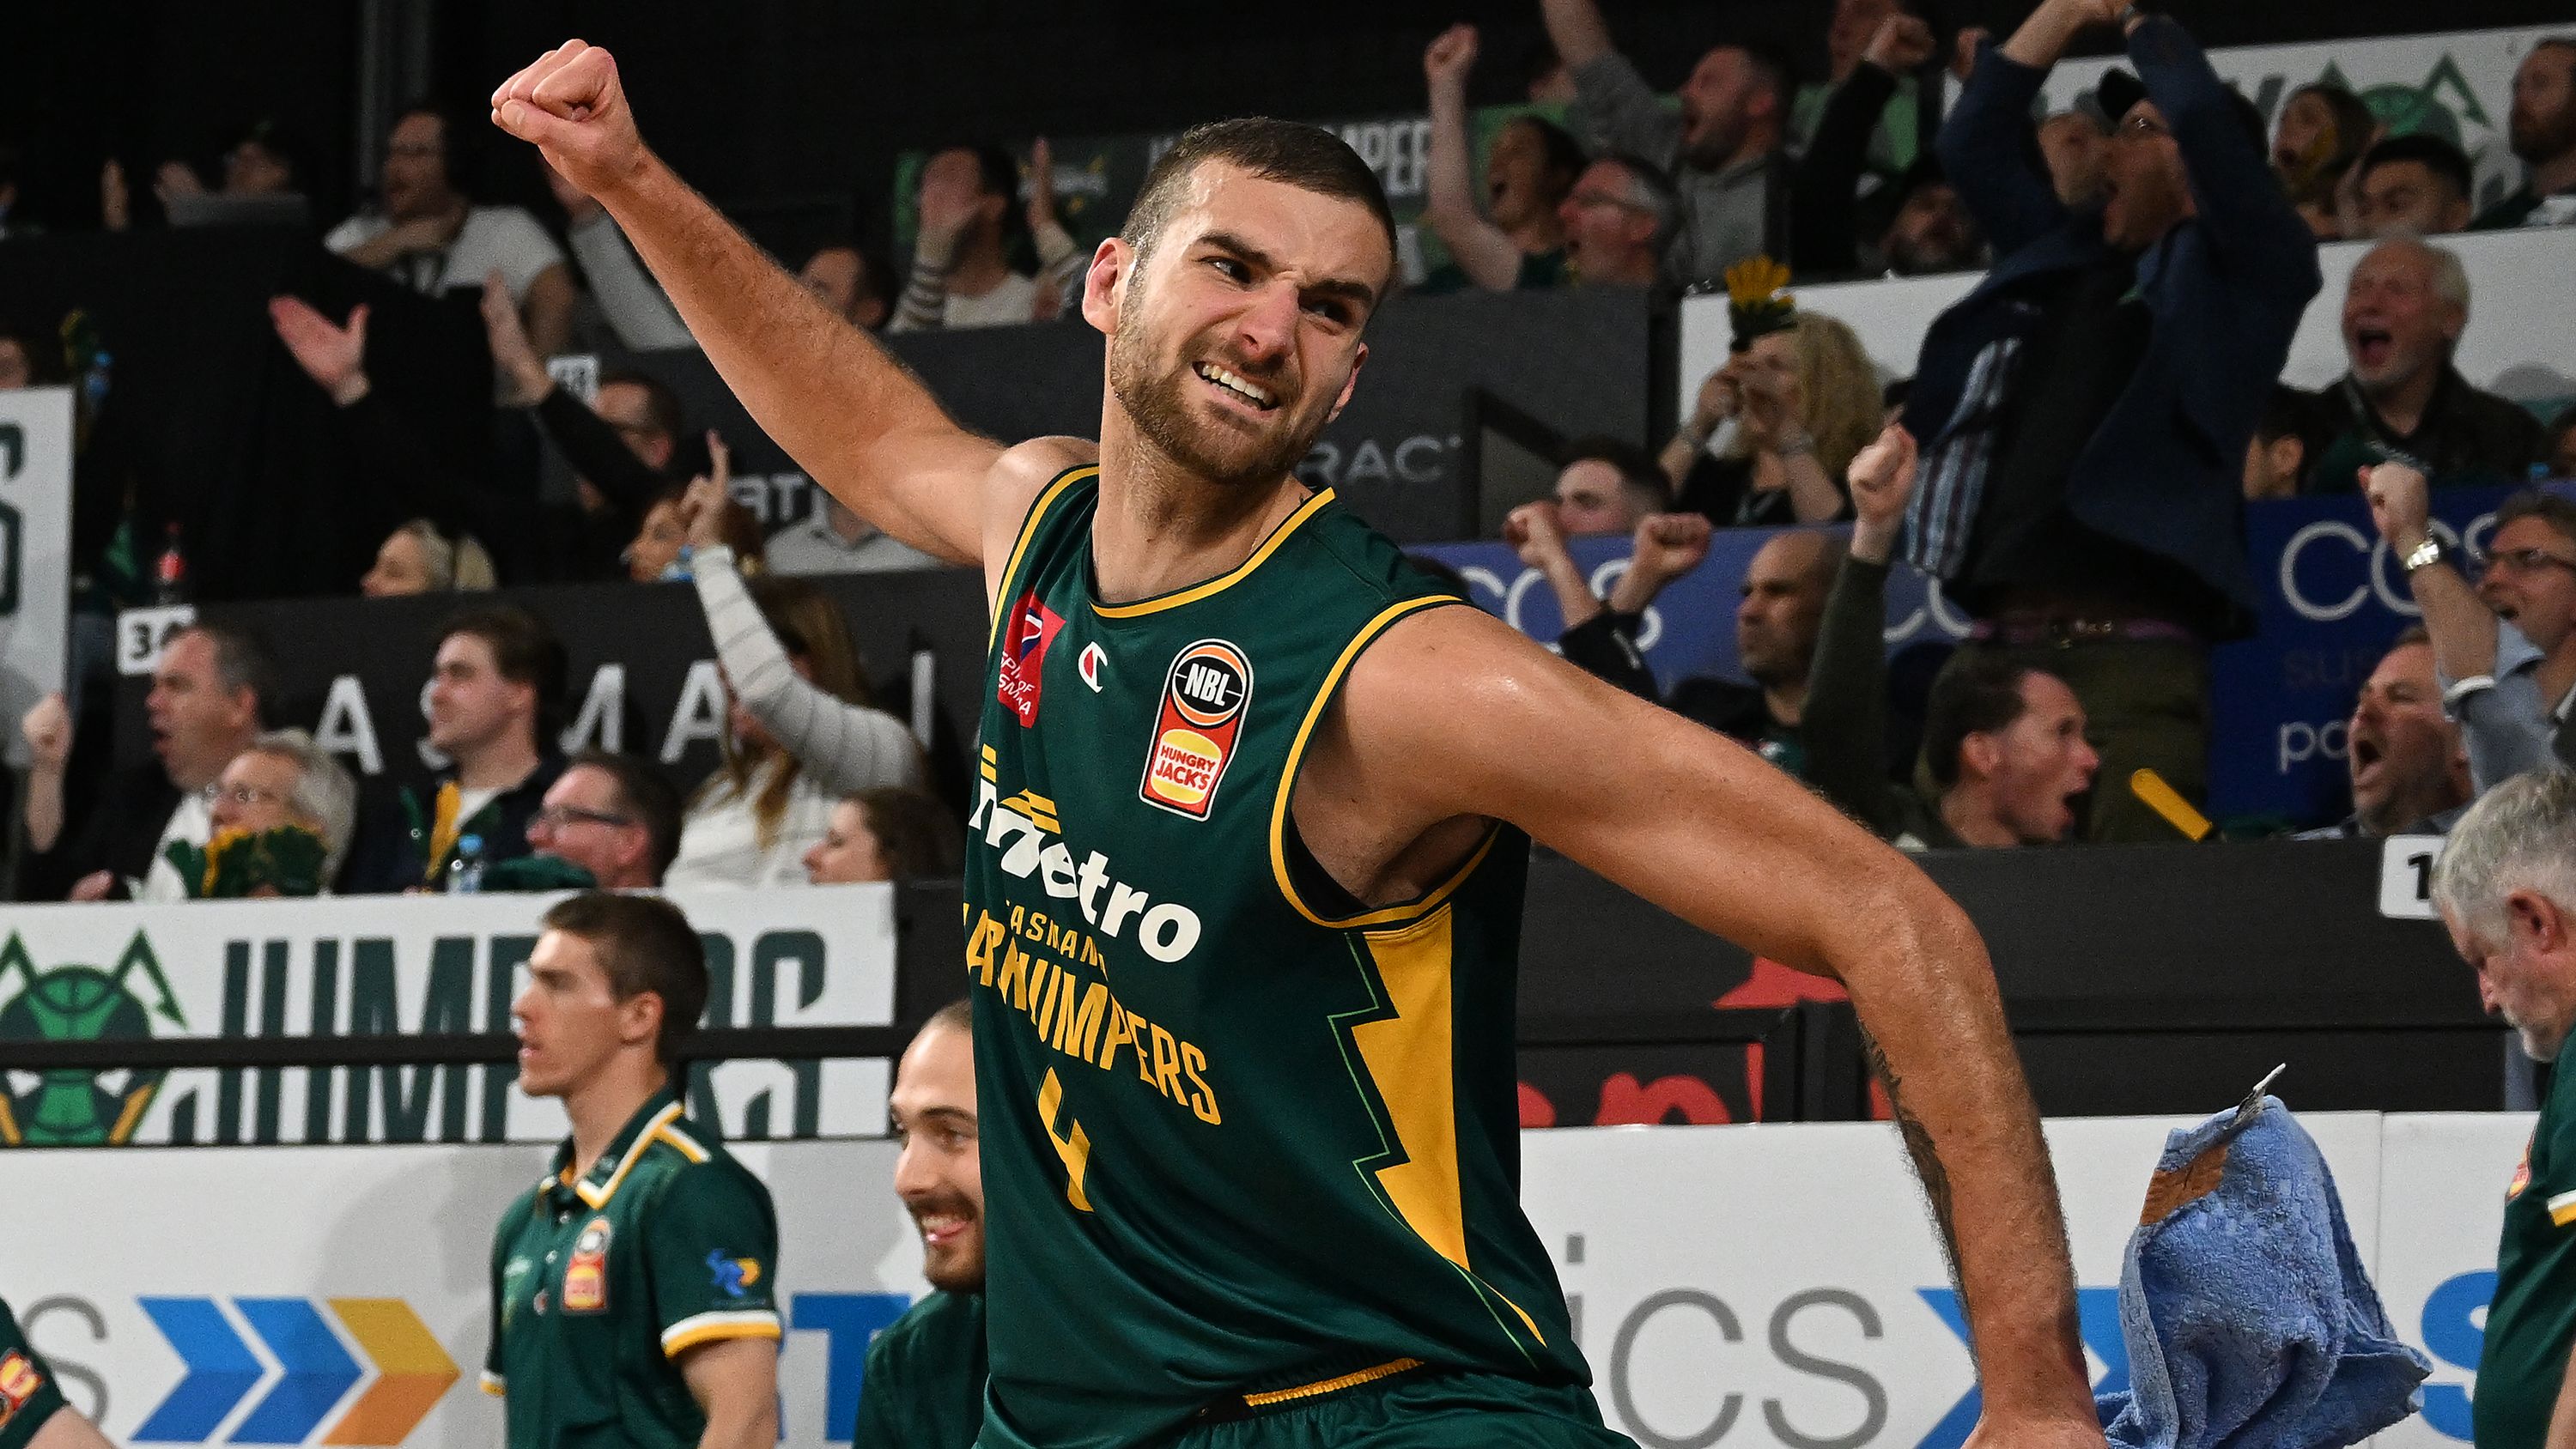 Tasmania JackJumpers progress to first NBL playoffs, end Perth Wildcats' ridiculous 35-year streak